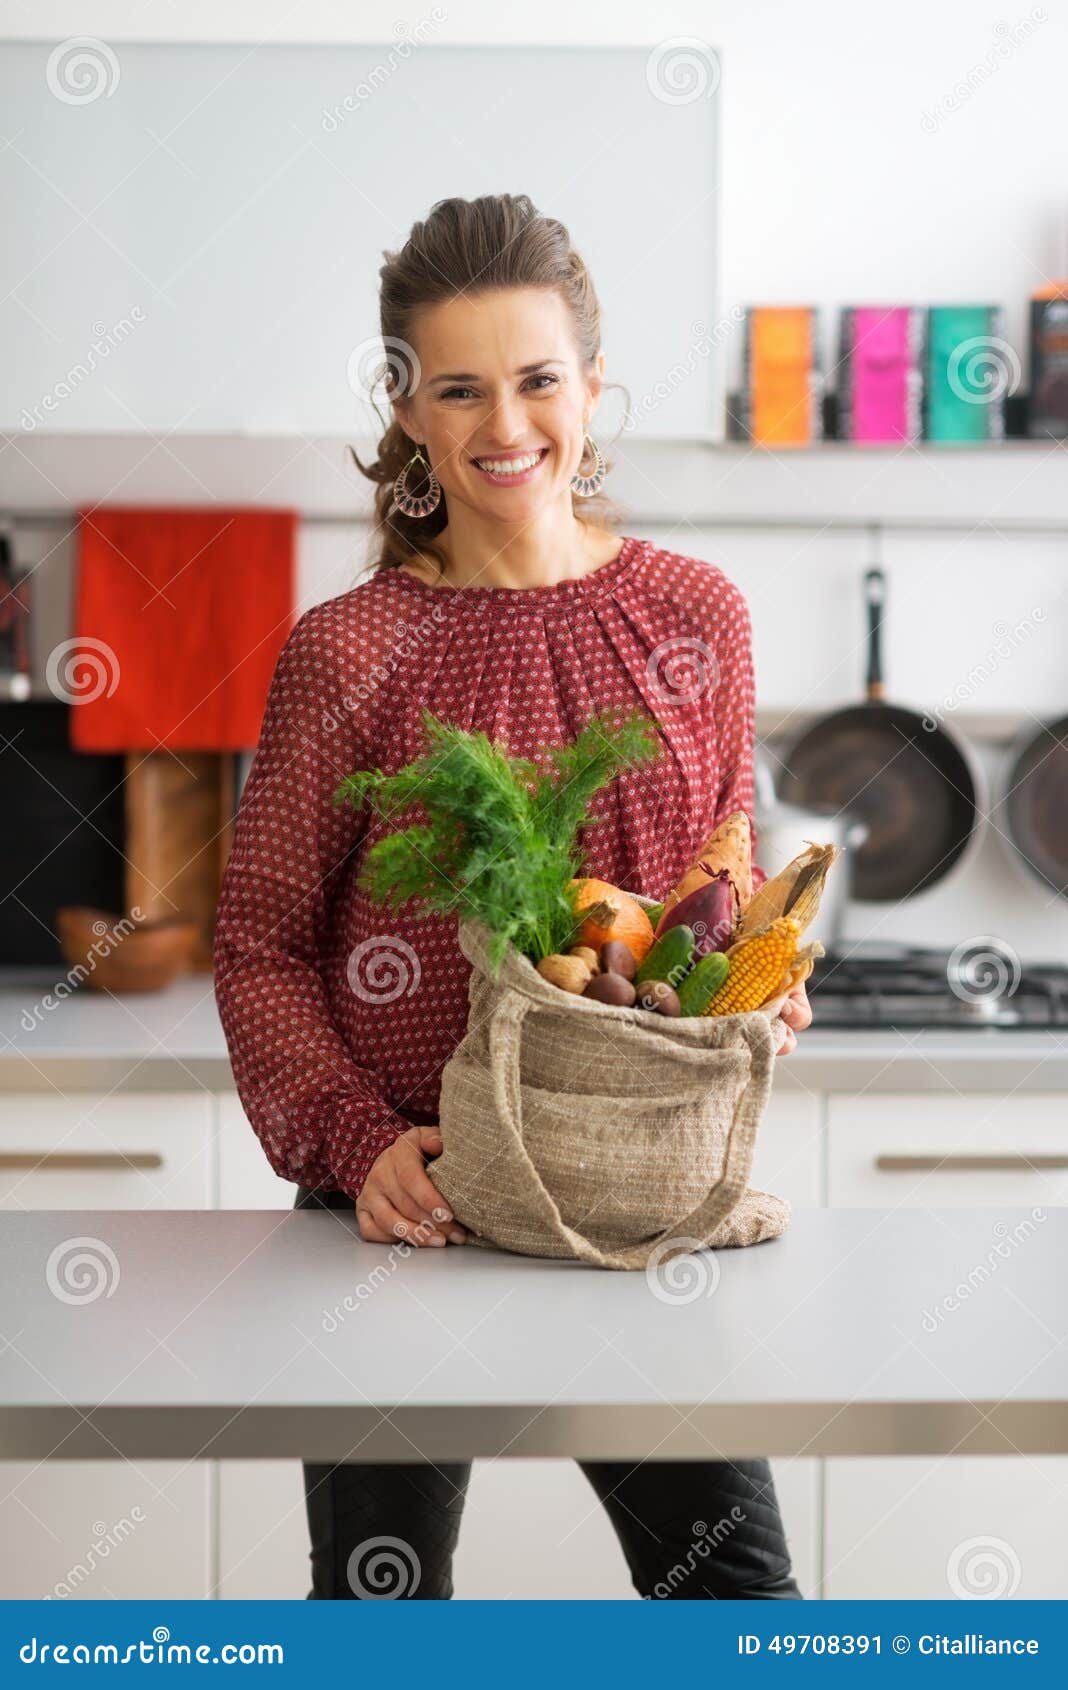 Housewife with Local Market Purchases in Kitchen Stock Im